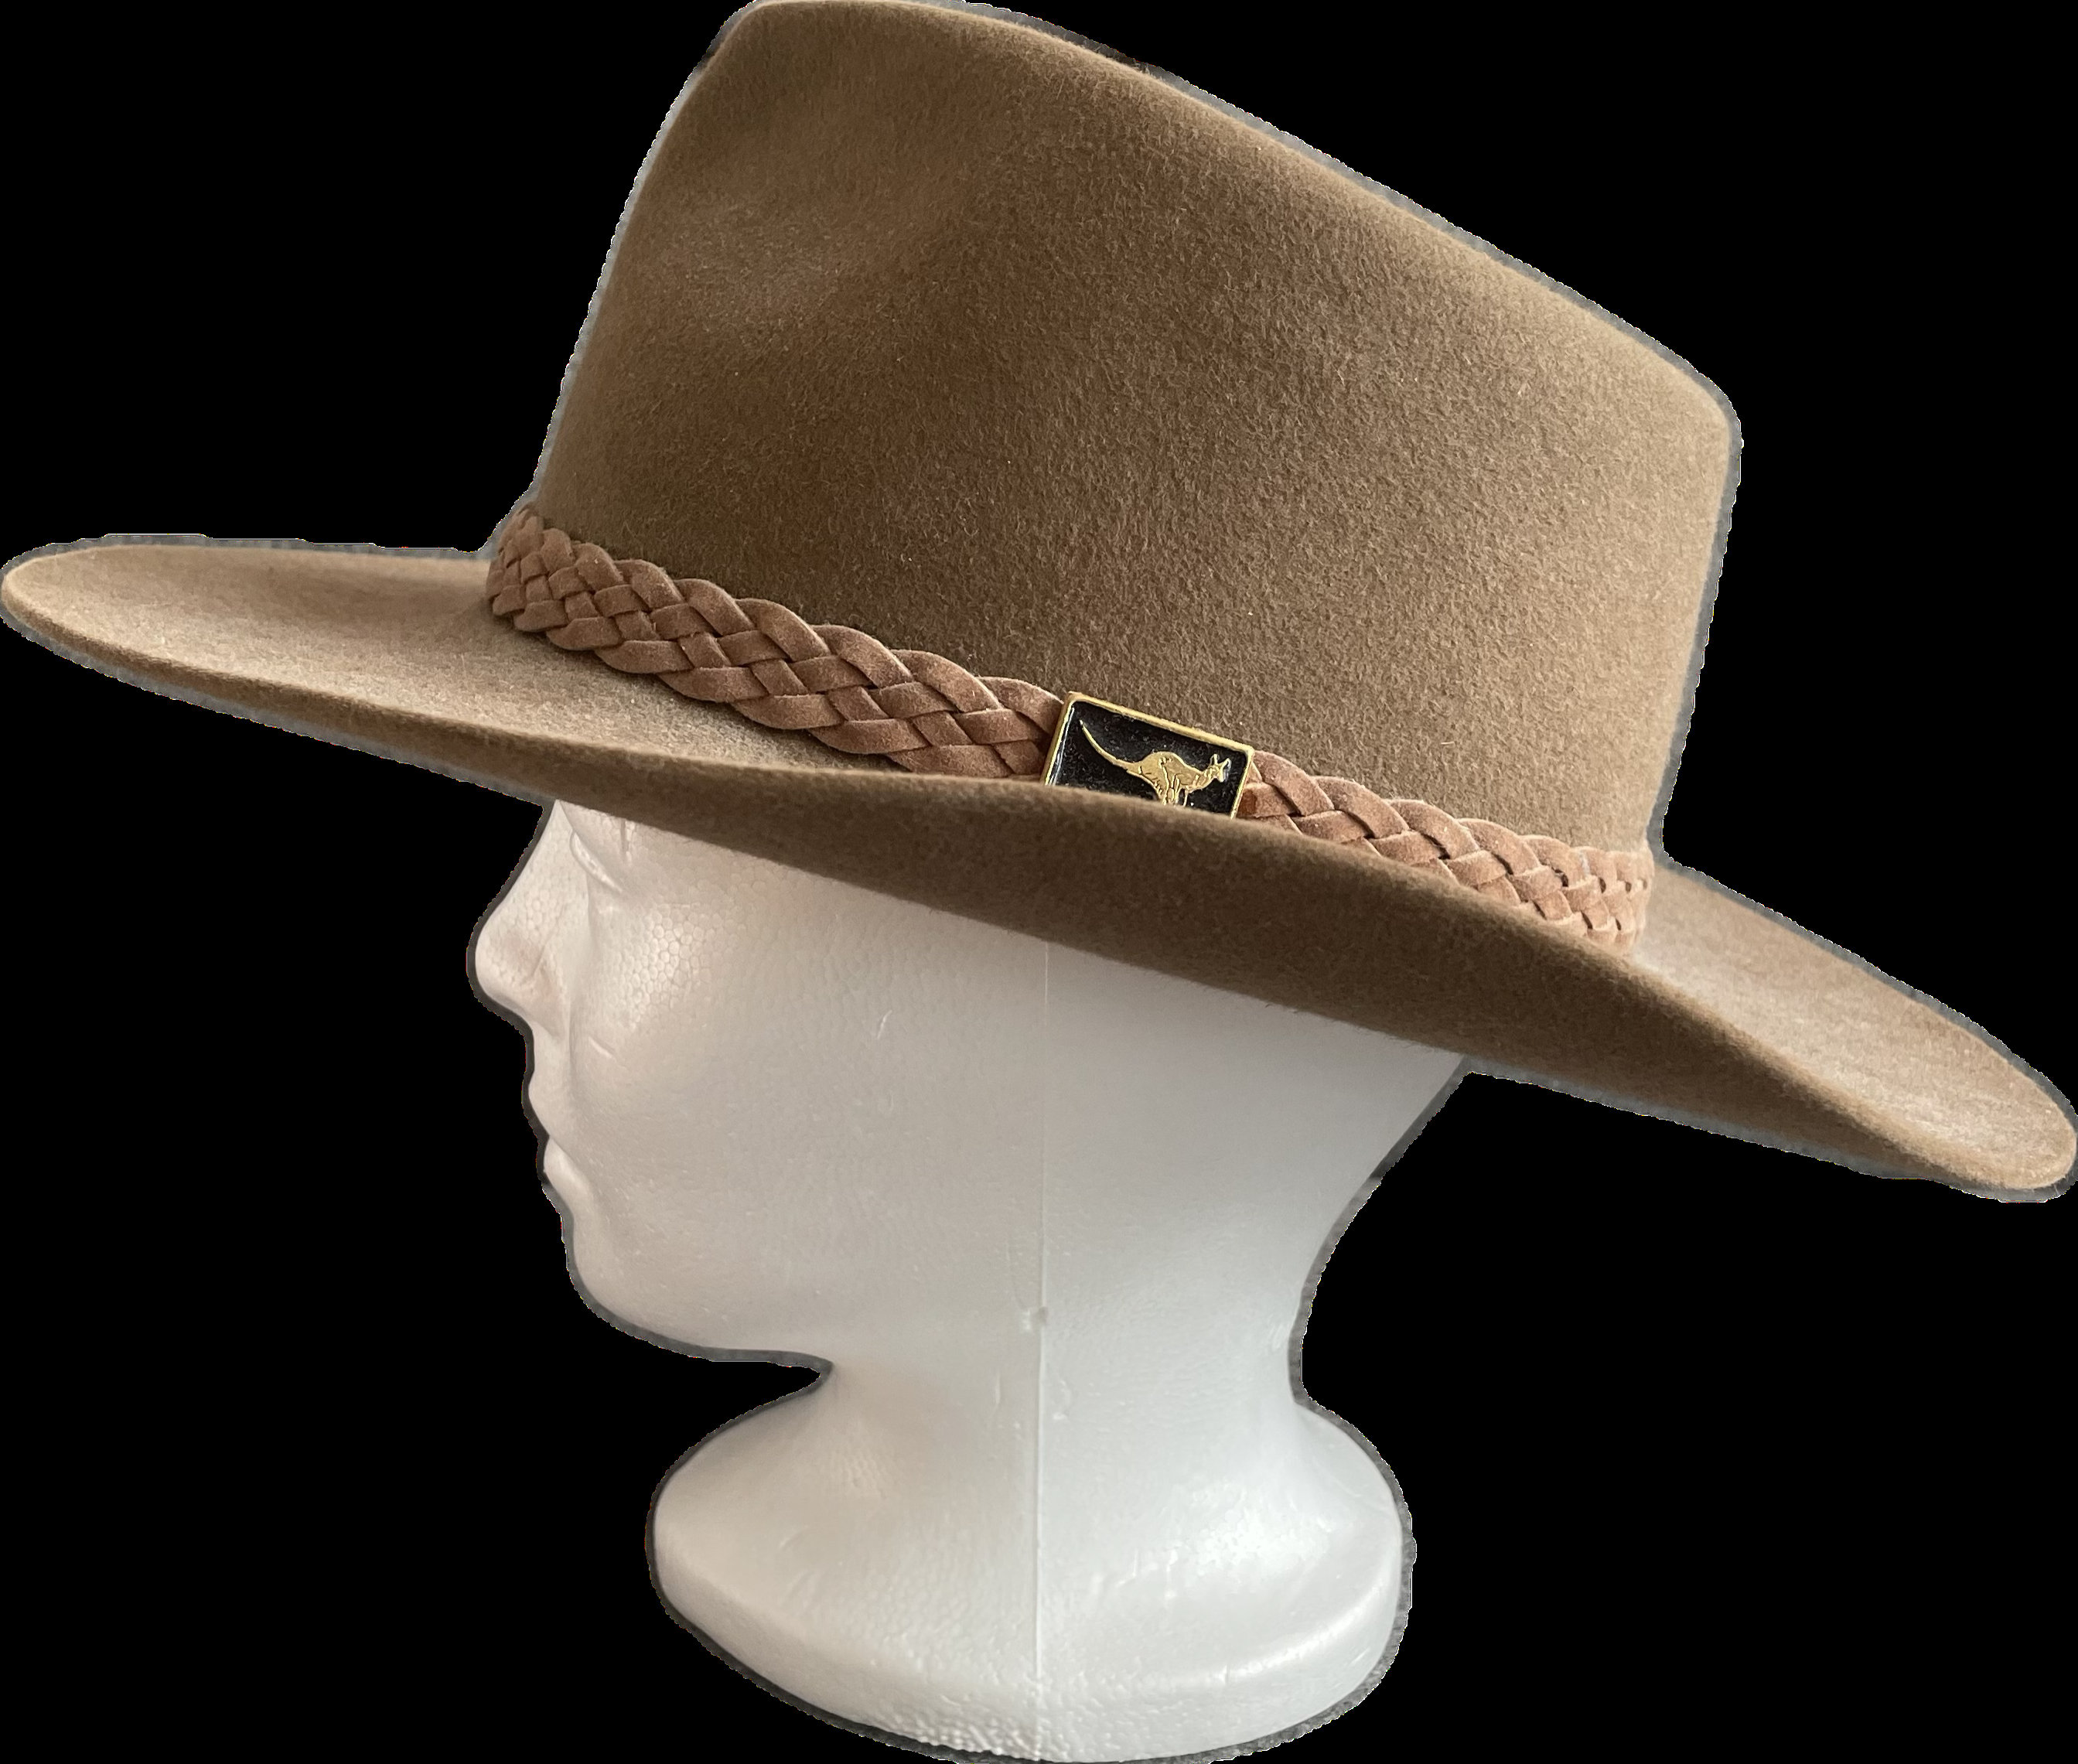 Australian Bush Hat by Australian Outback Collection, Jackaroo Style, Pure Felt Fur, 21.5 inches or 55 cm Inner Circumference